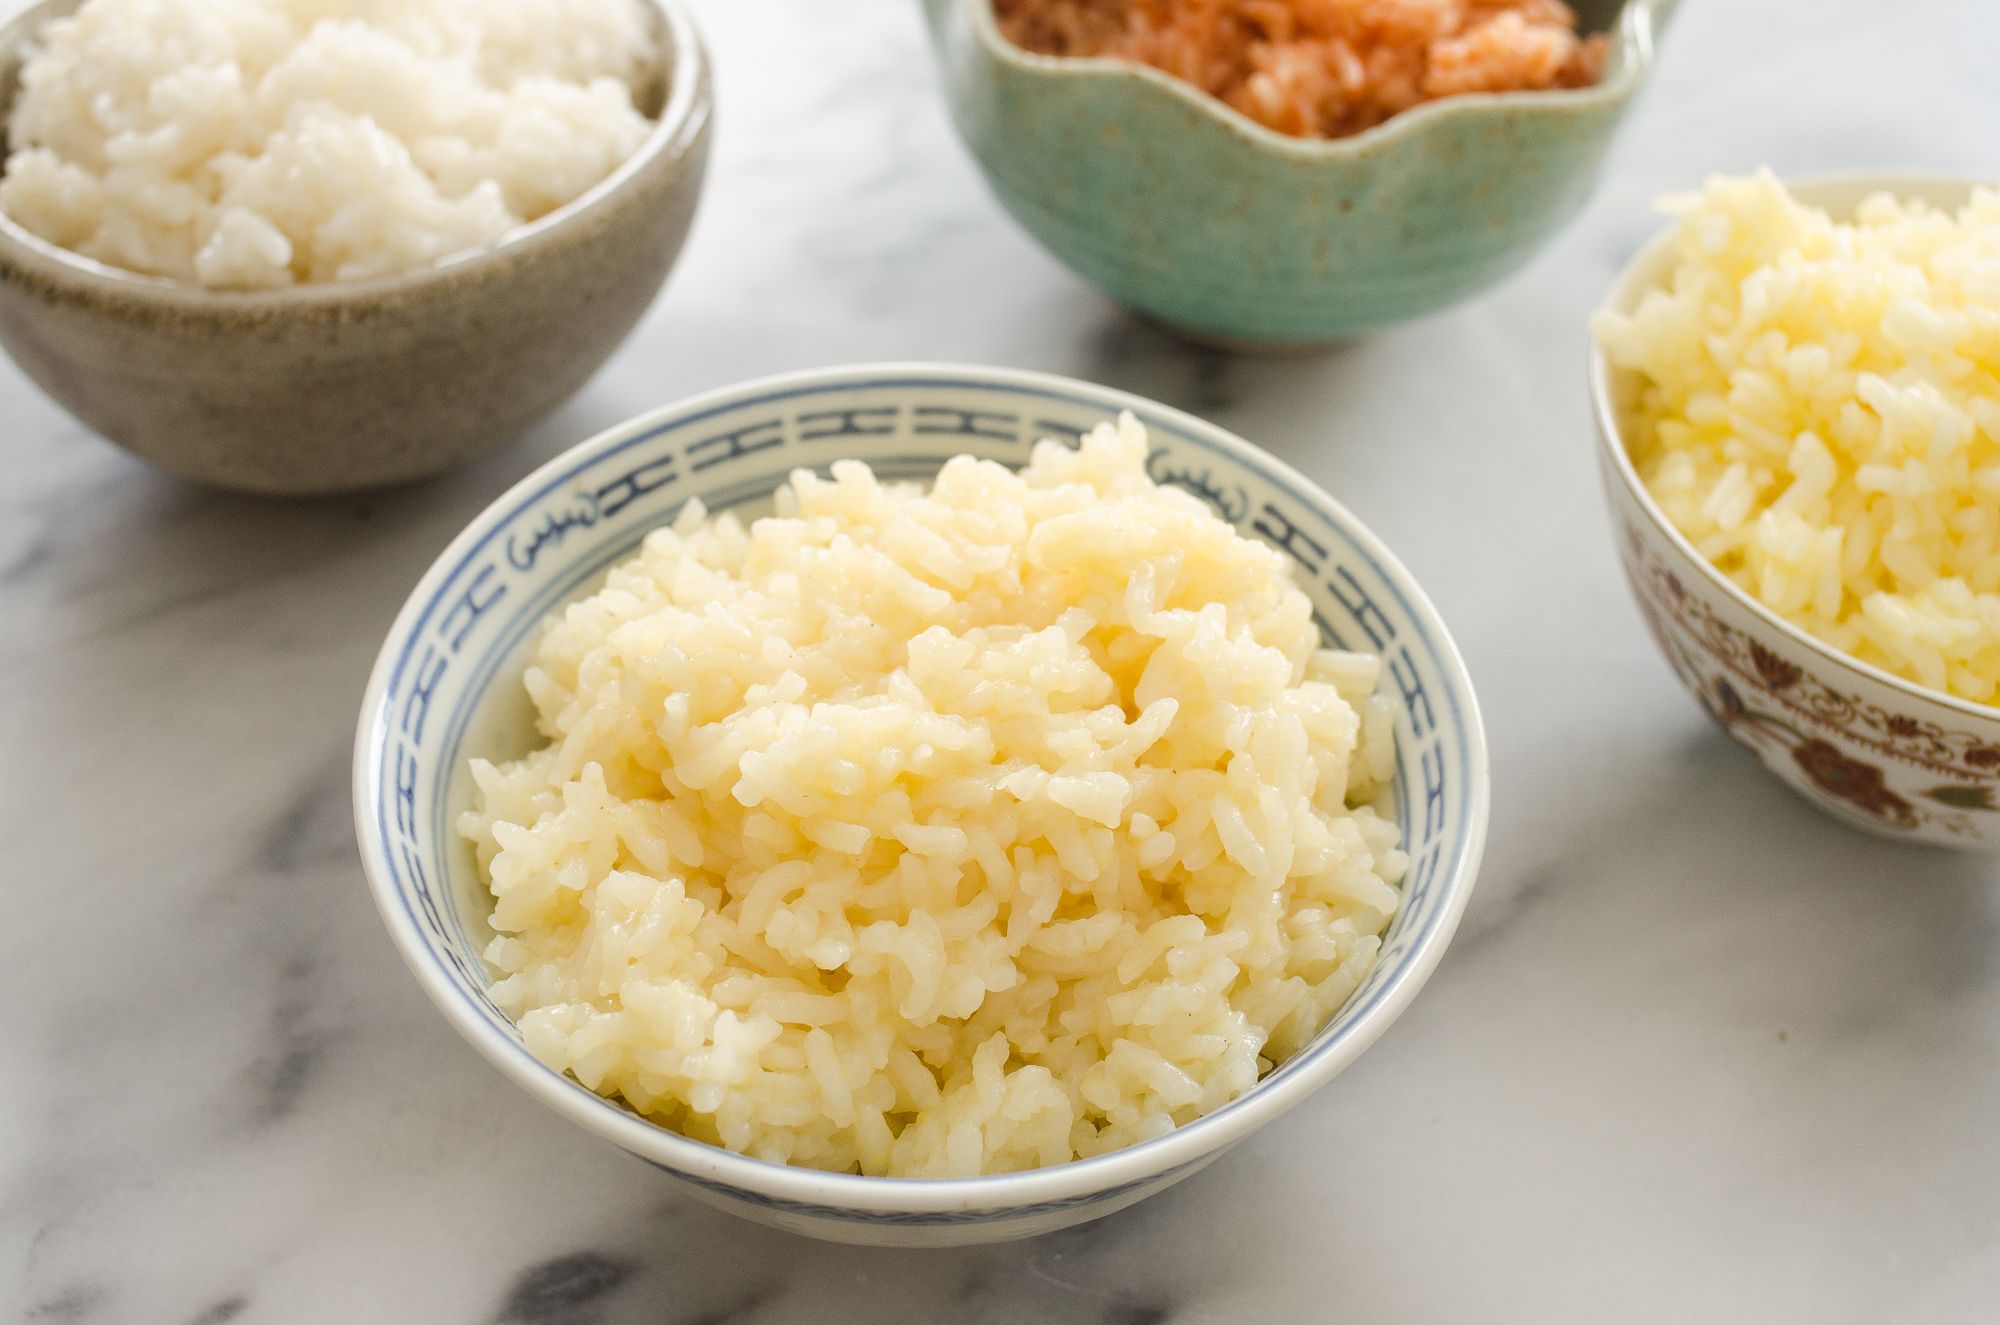 How to Make Steamed Rice without Rice Cooker 米飯